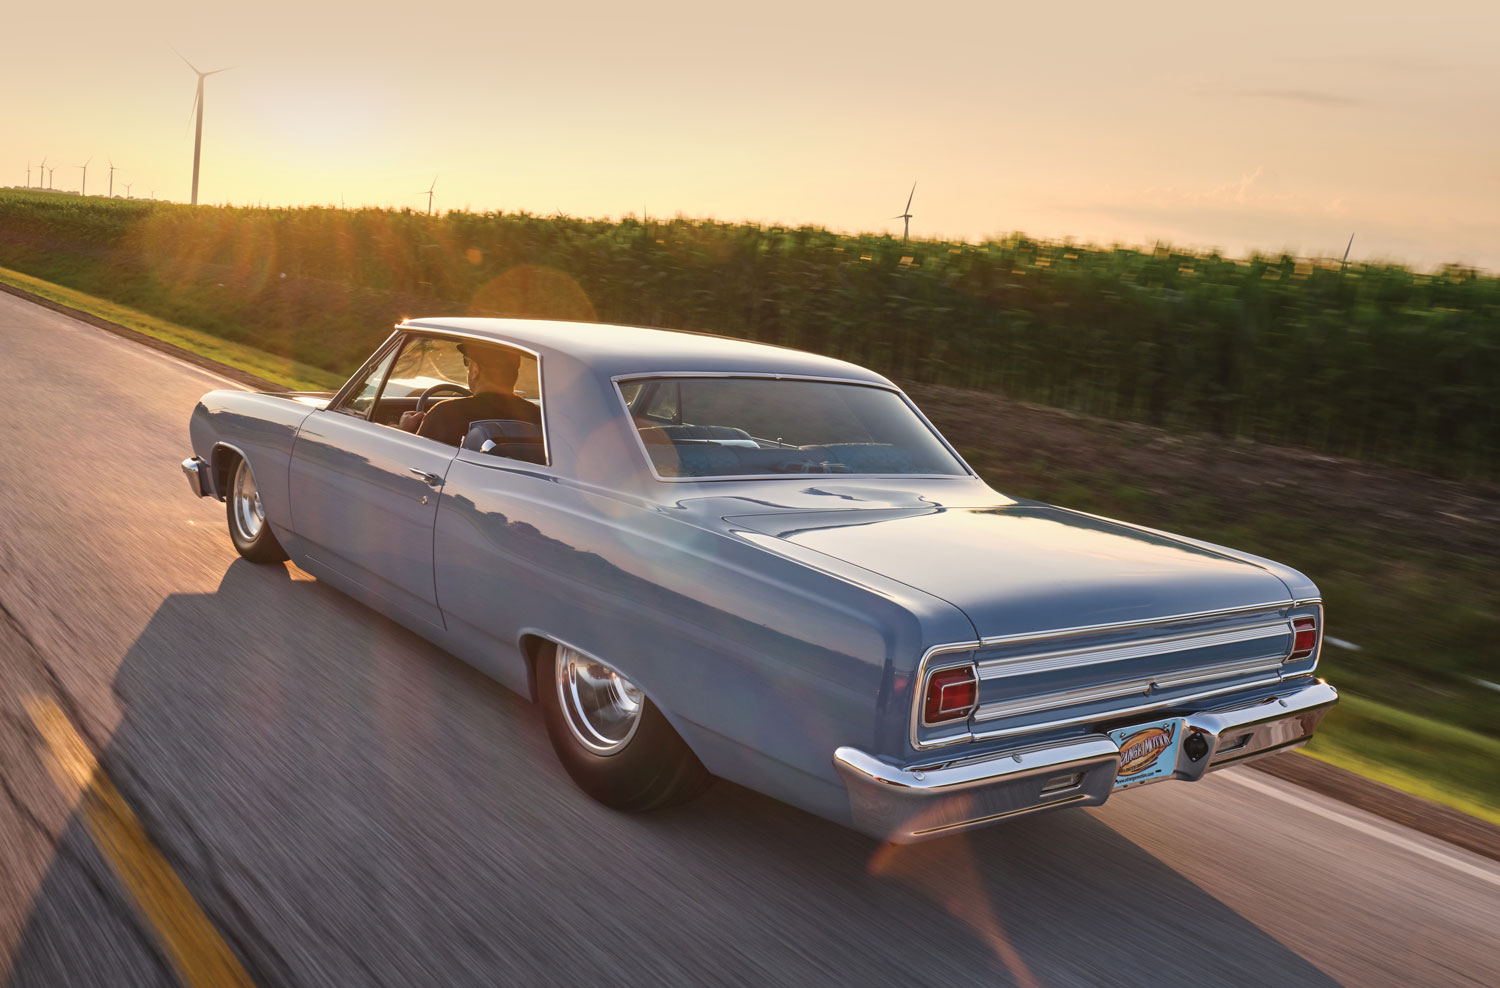 ’65 Chevelle driving towards a sunset